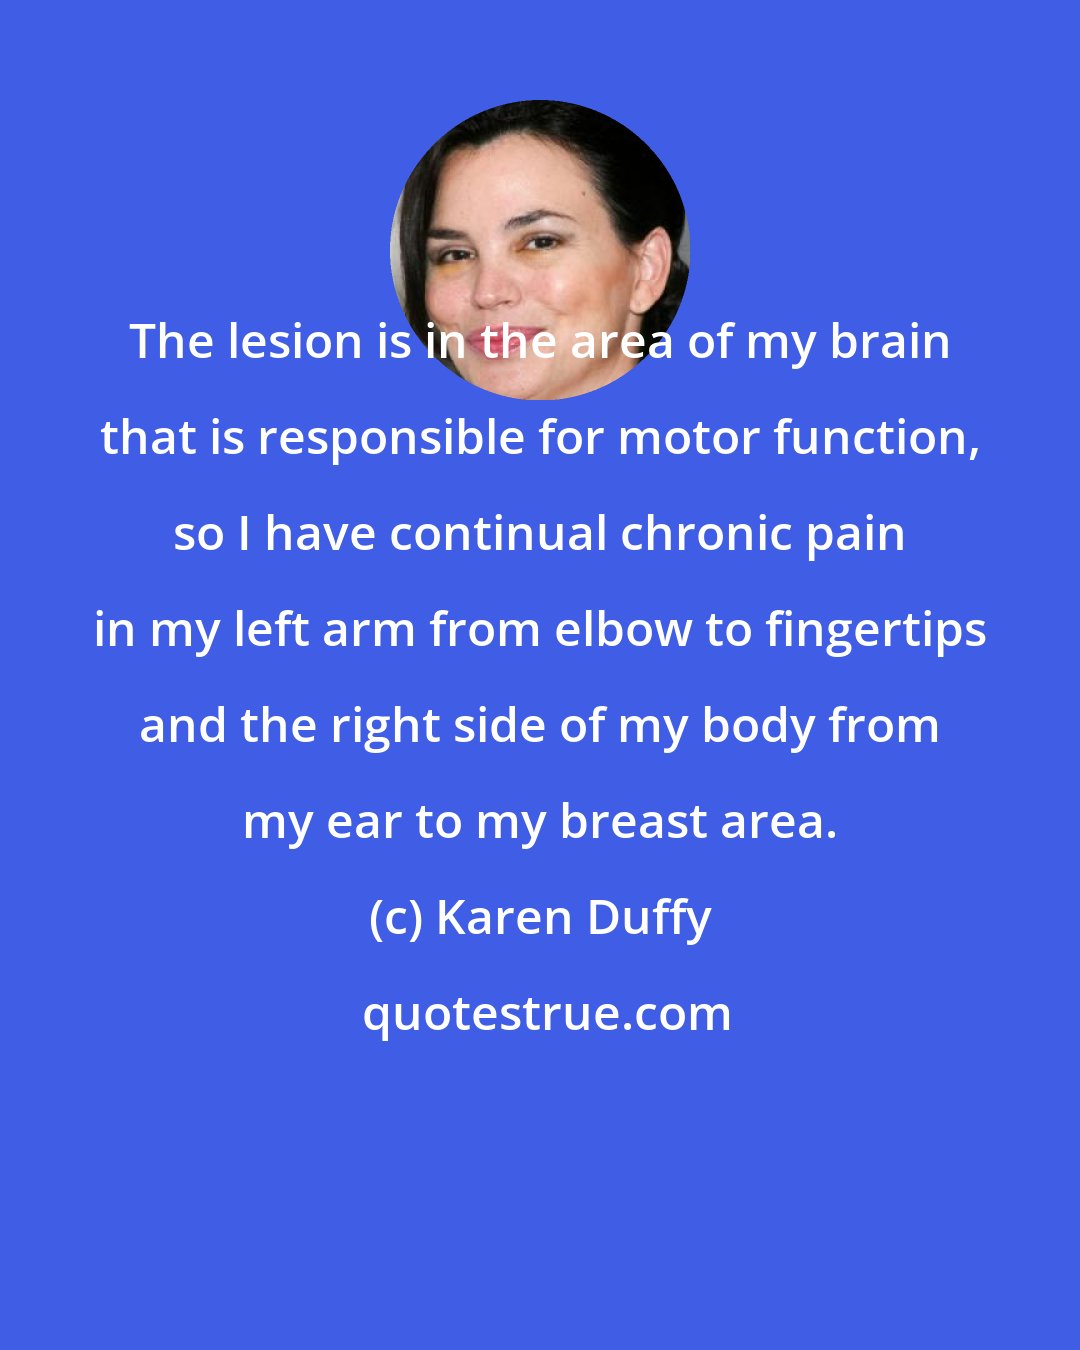 Karen Duffy: The lesion is in the area of my brain that is responsible for motor function, so I have continual chronic pain in my left arm from elbow to fingertips and the right side of my body from my ear to my breast area.